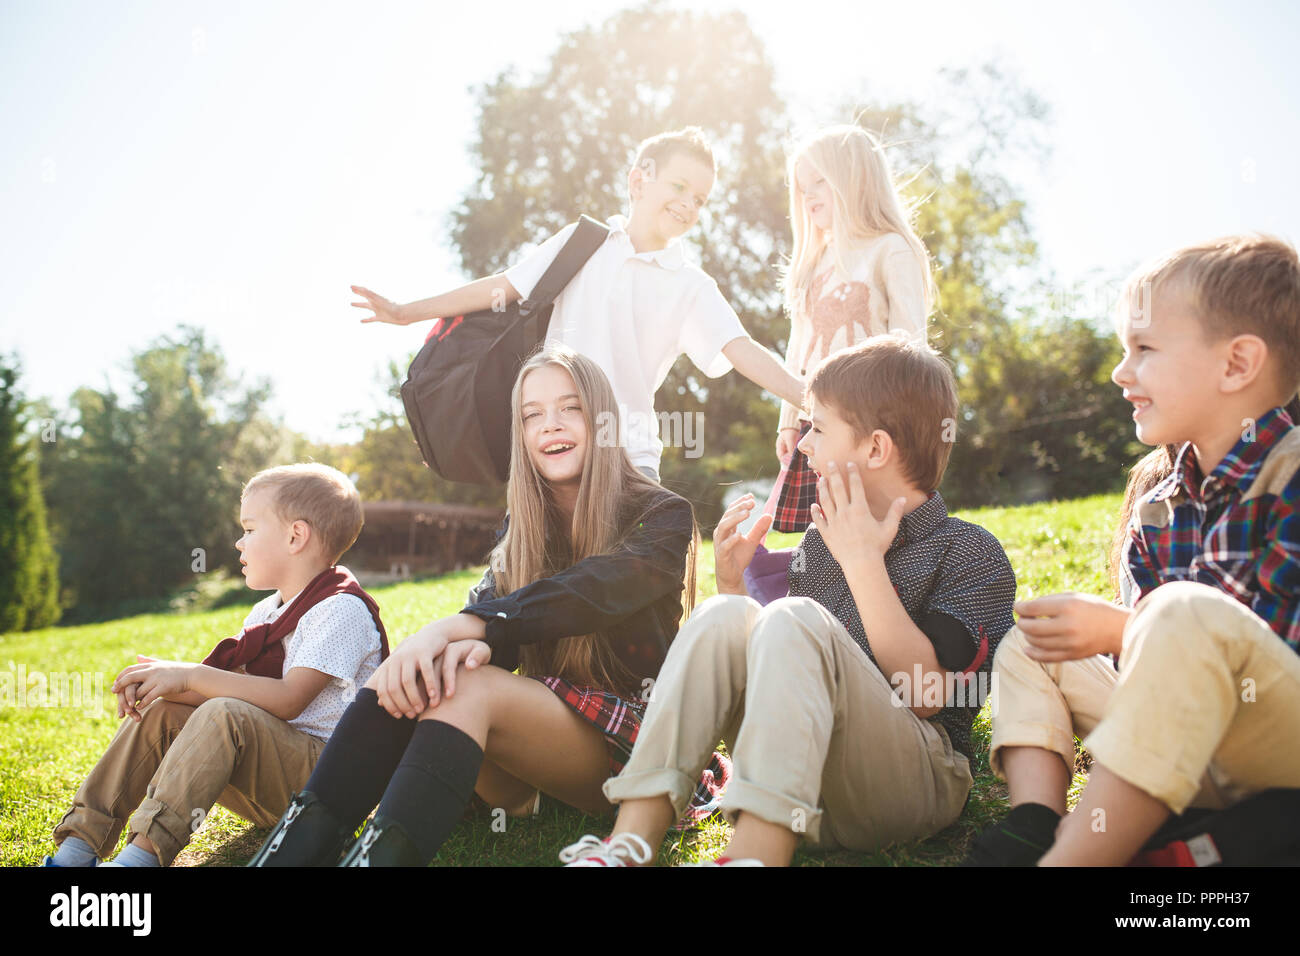 A group of happy smiling children of school and preschool age are sitting on the green grass in the park. The childhood, Kids fashion, school, education, friends, lifestyle, leisure, schoolchildren concept Stock Photo